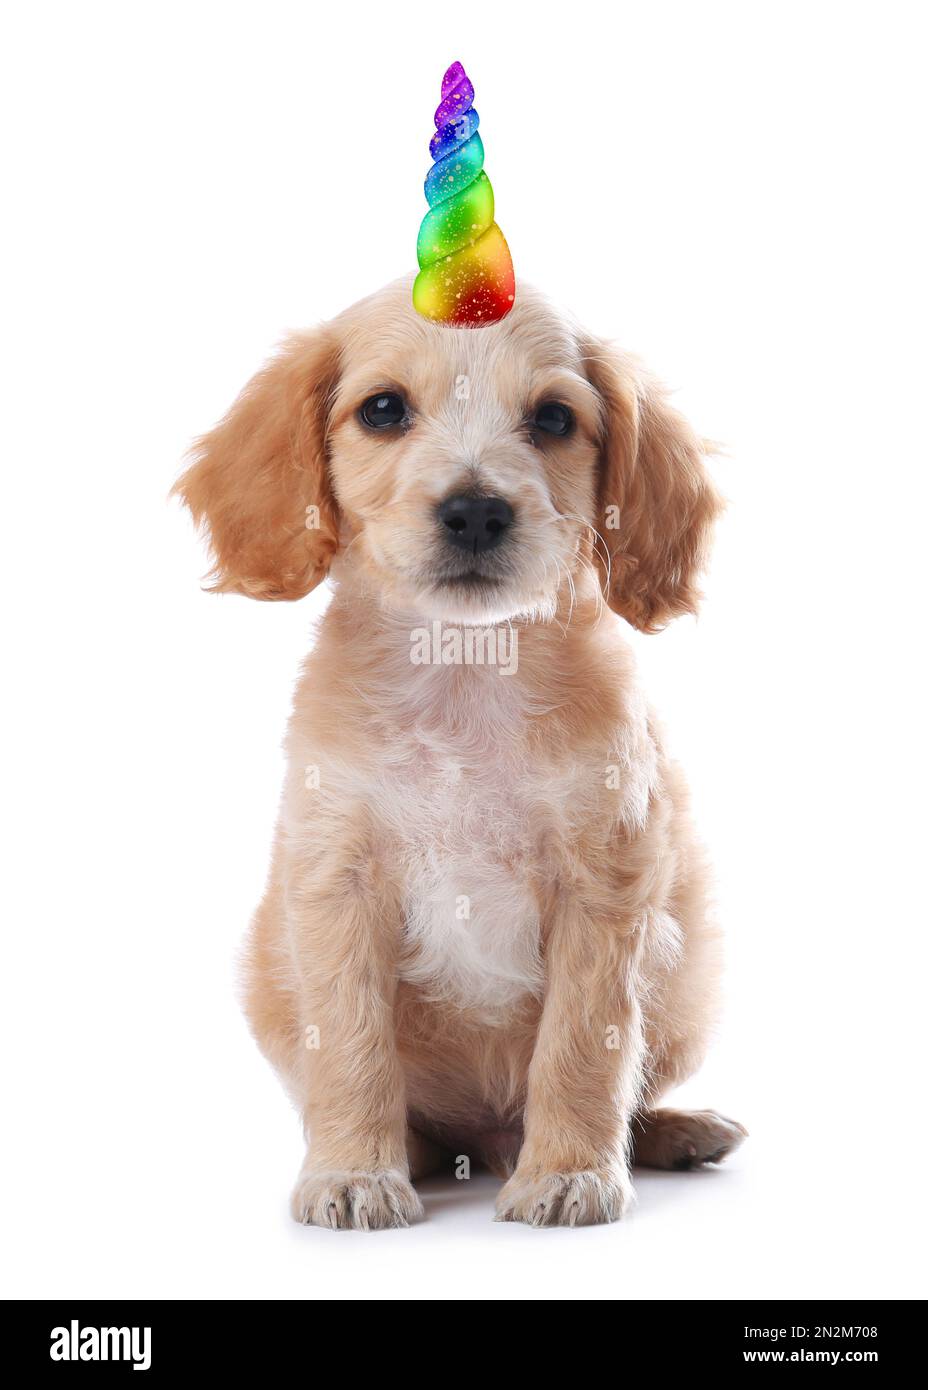 Cute puppy with rainbow unicorn horn on white background Stock Photo